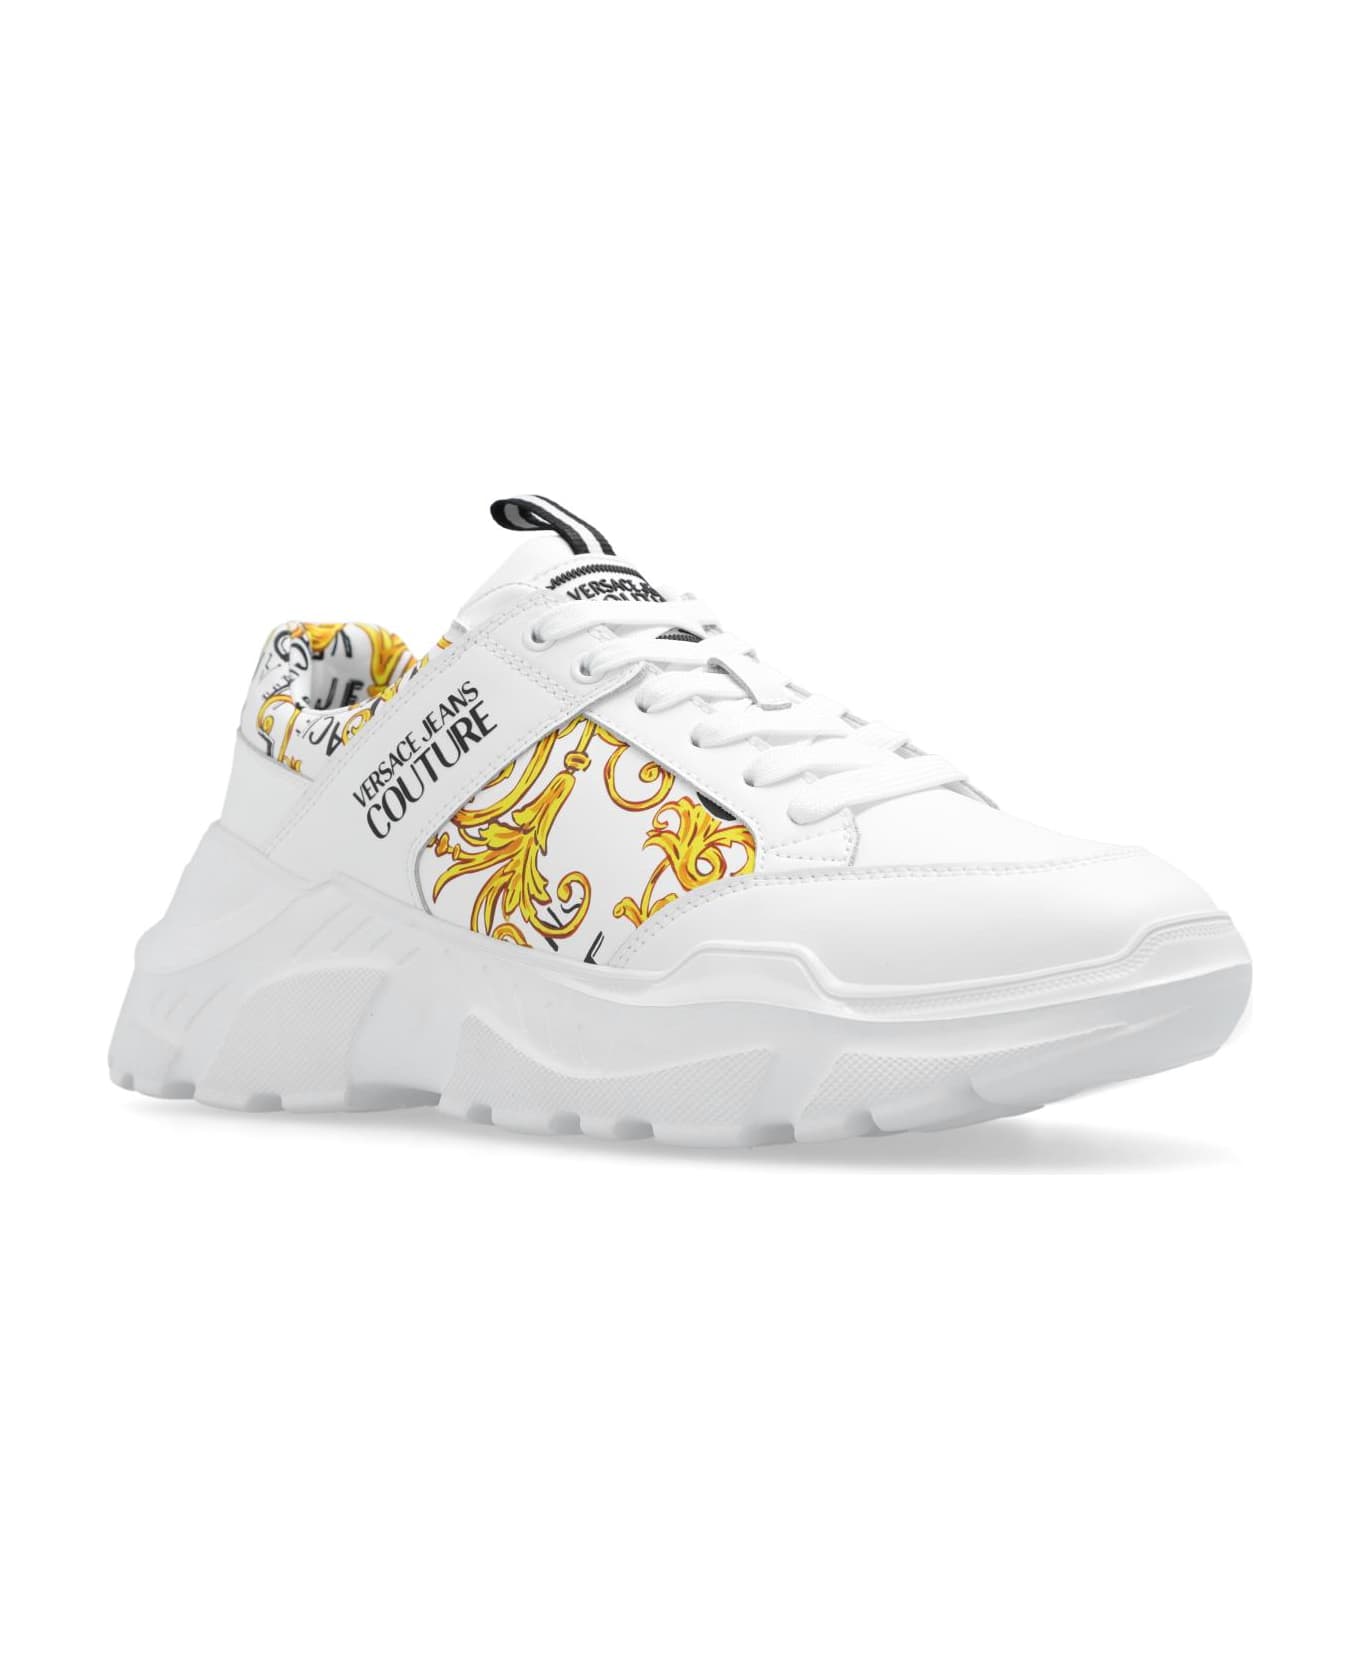 Versace Jeans Couture Printed Sneakers - White